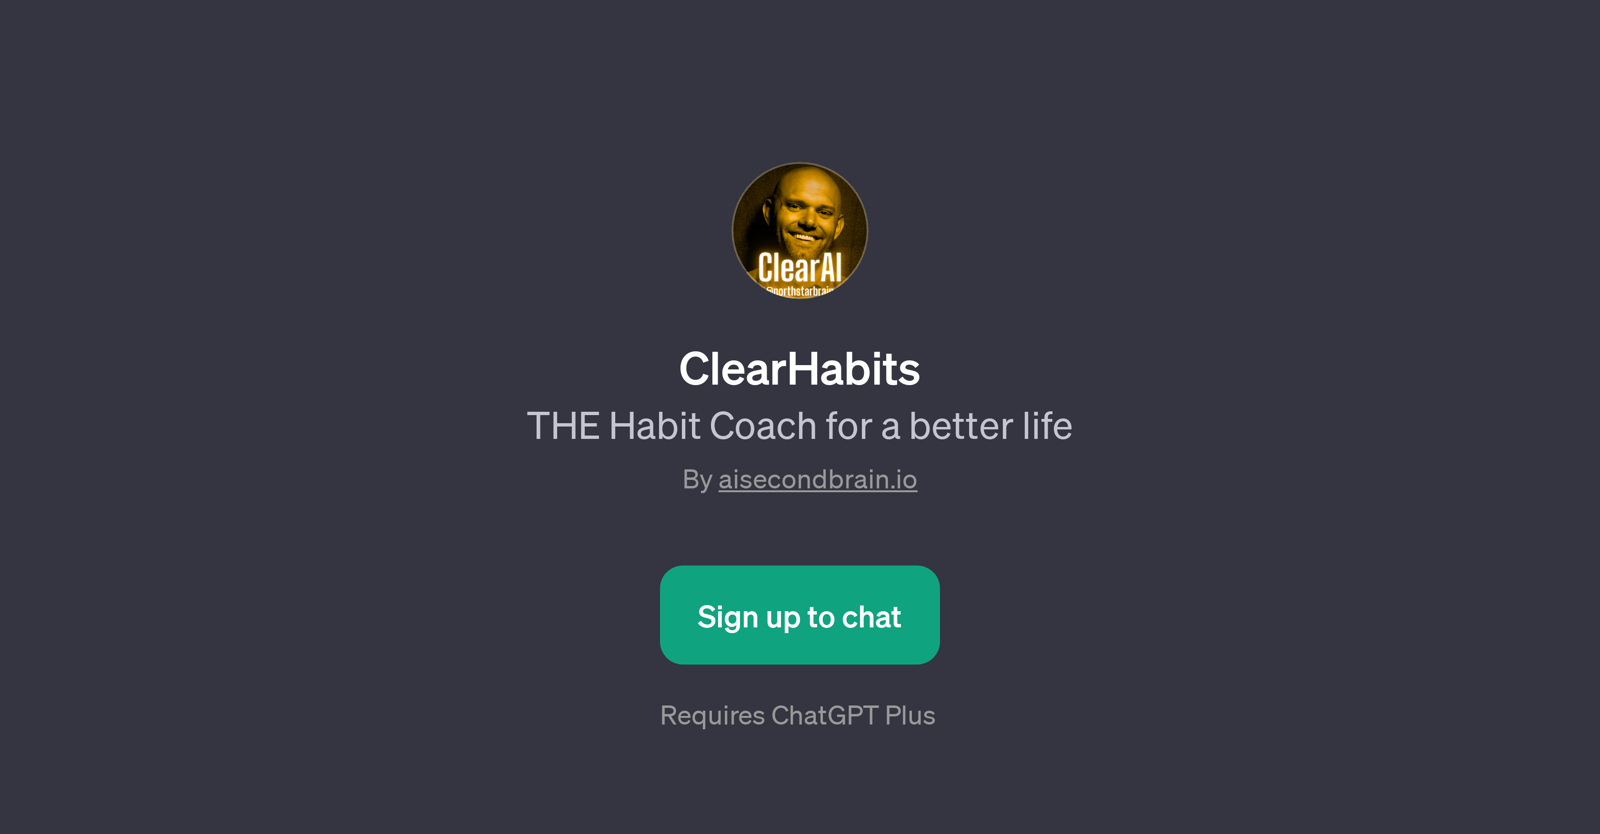 ClearHabits website